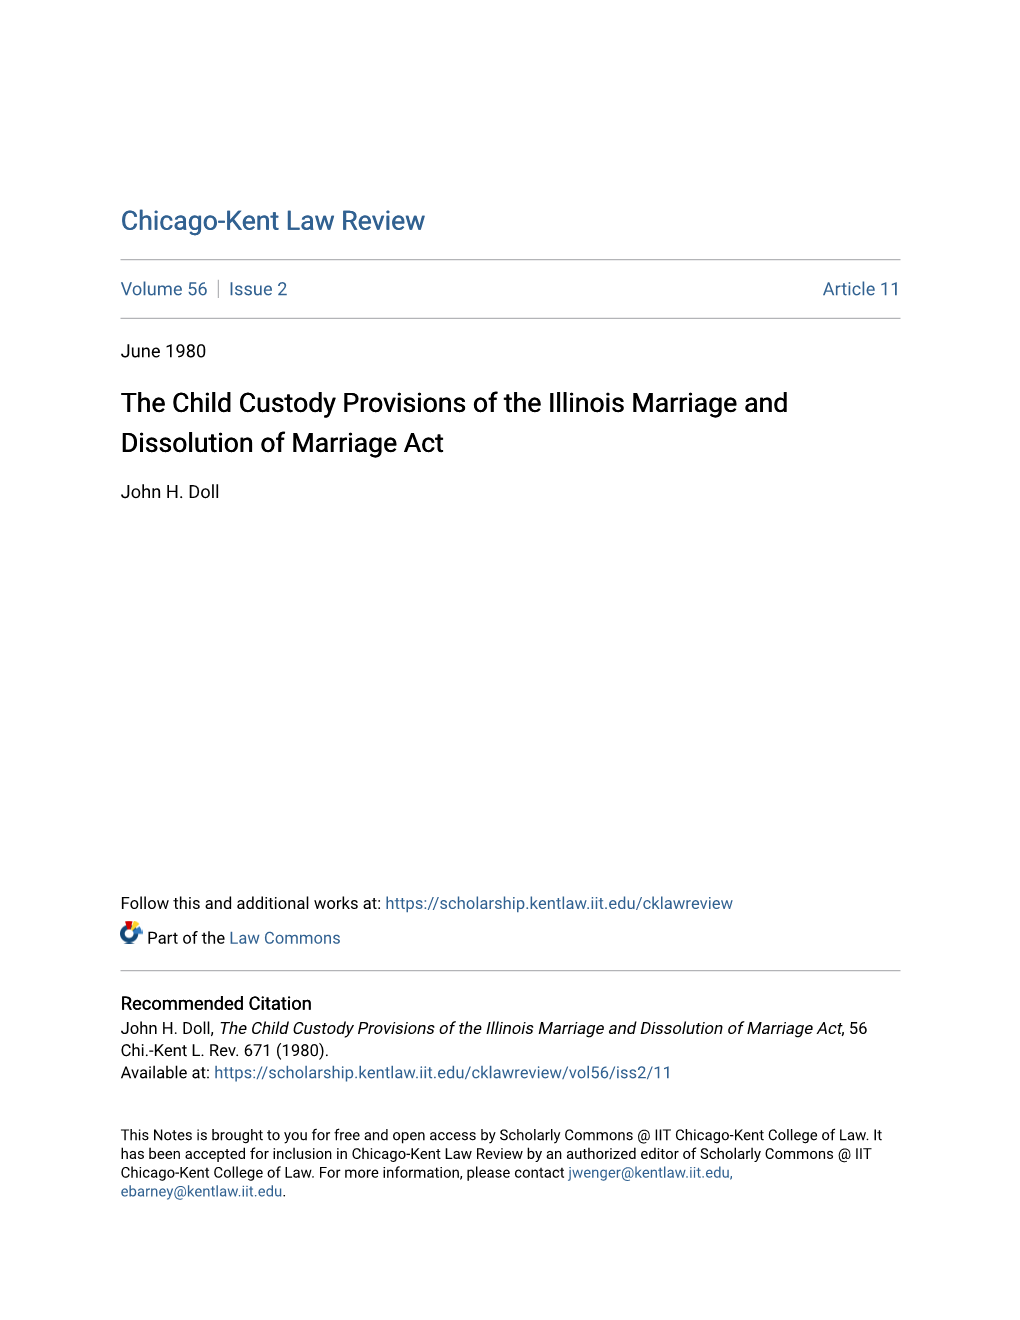 The Child Custody Provisions of the Illinois Marriage and Dissolution of Marriage Act